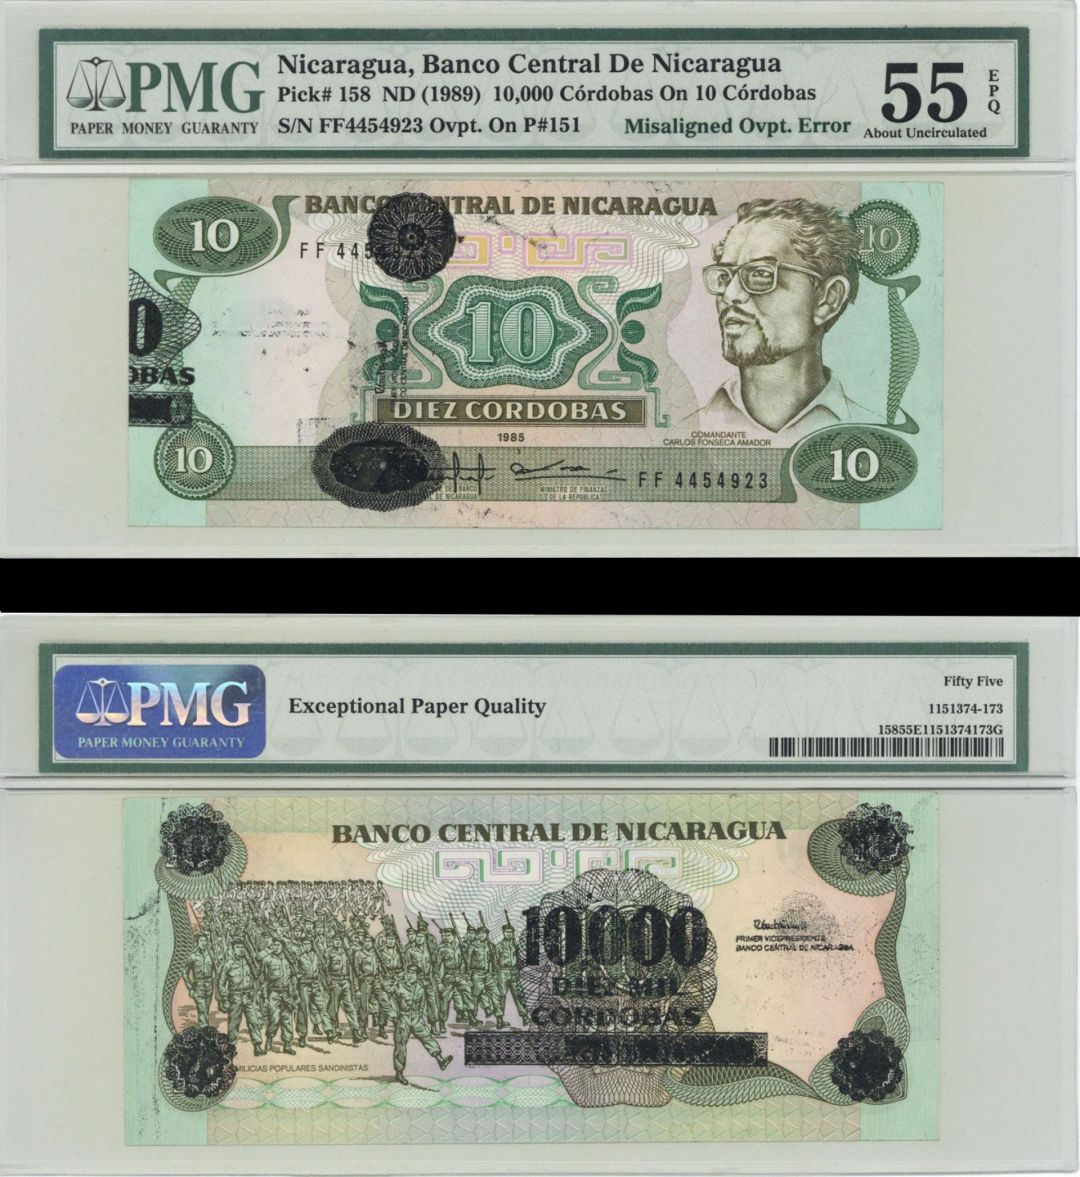 Nicaragua - 10,000 Cordobas on 10 Cordobas - P-158 - PMG 55 - 1989 dated Foreign Paper Money Error